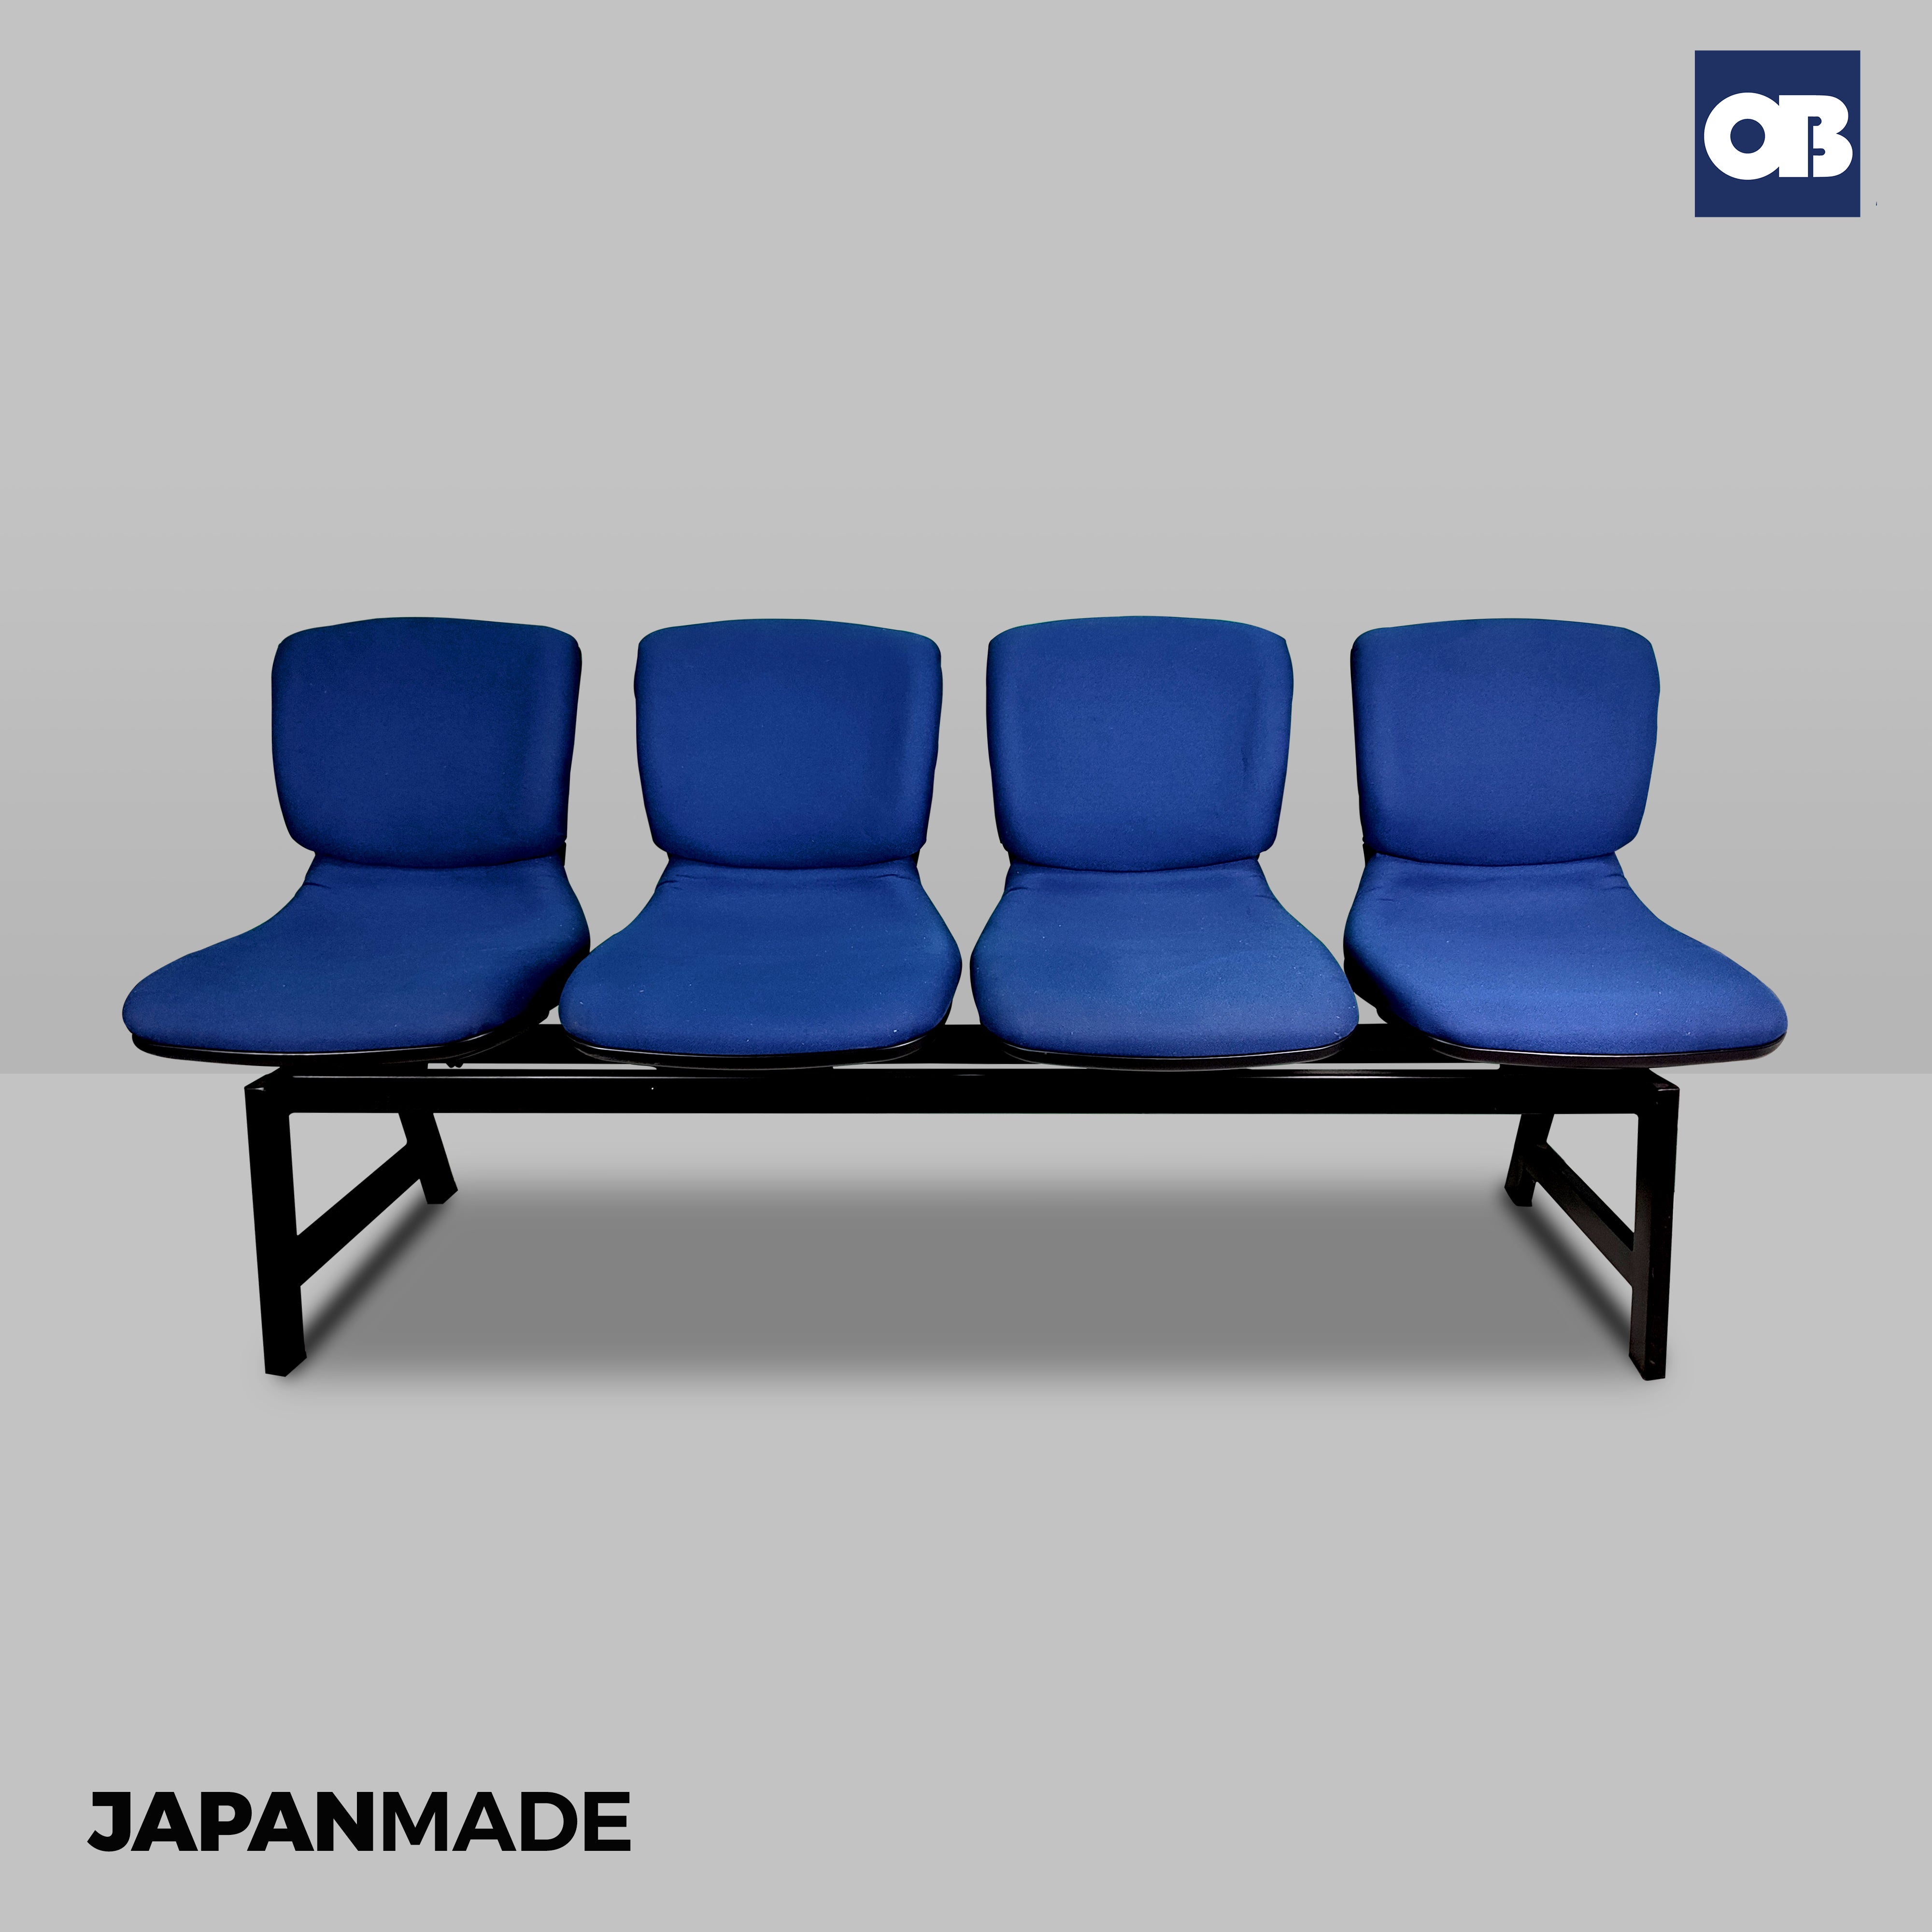 JAPANMADE 4-Seater Gang Chair